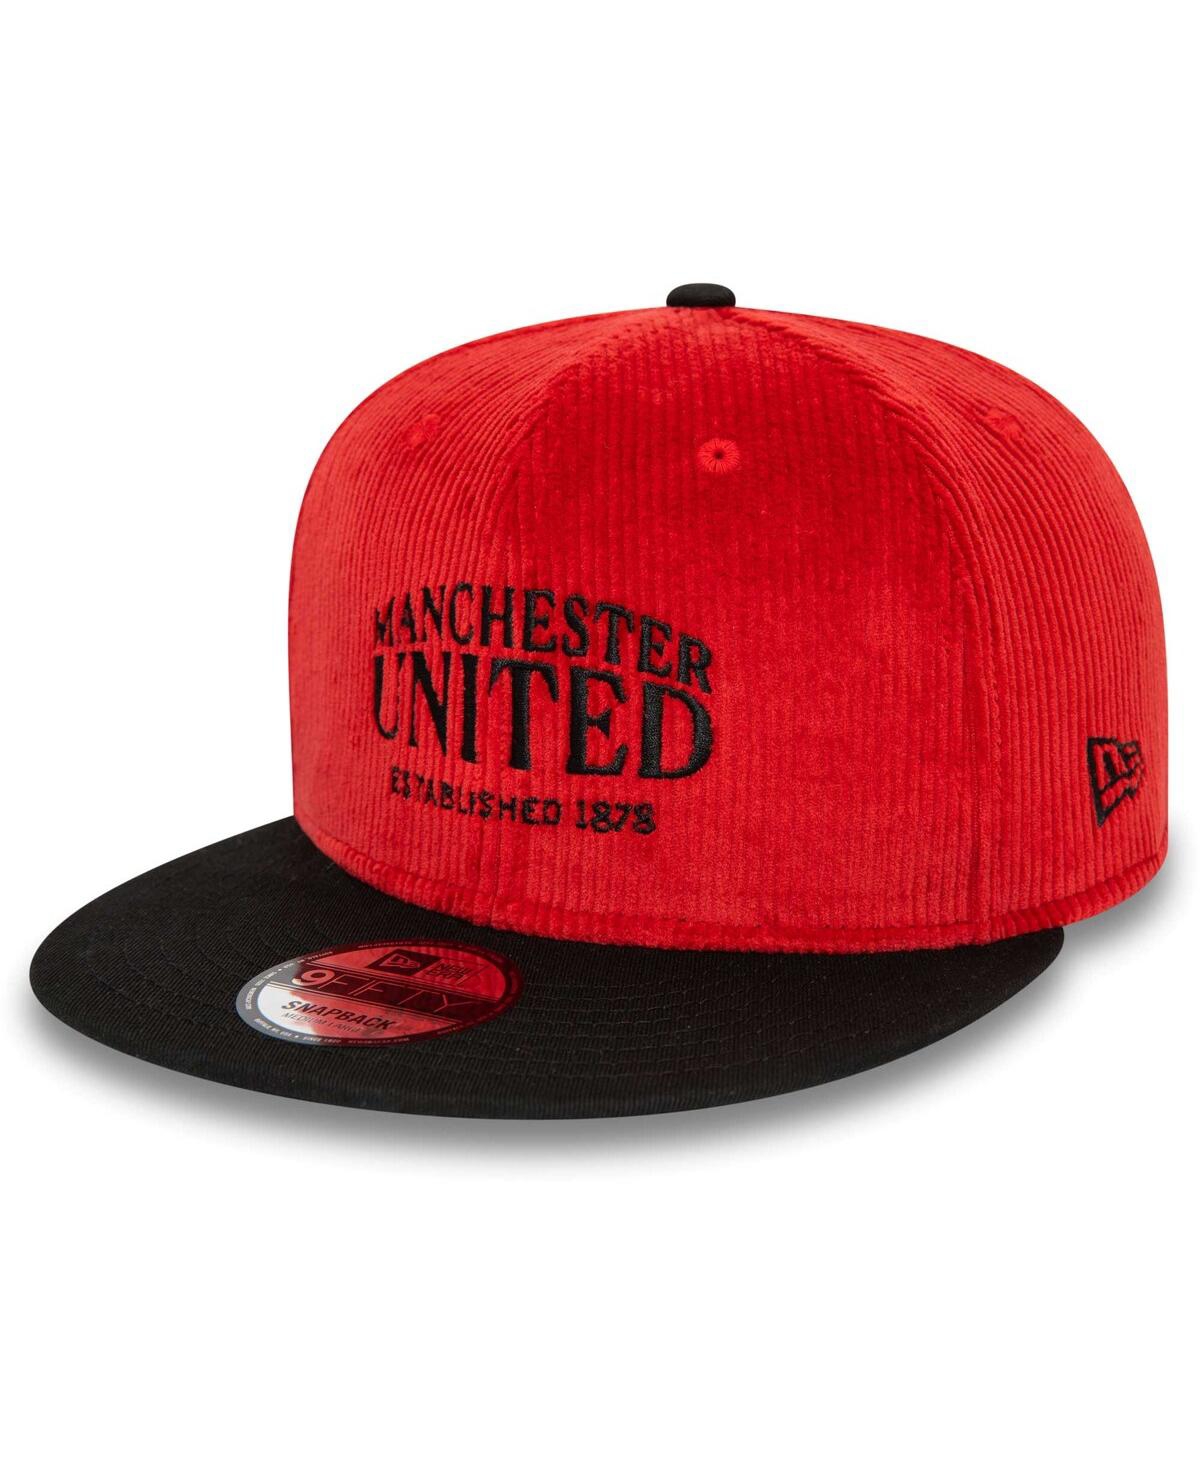 Shop New Era Men's  Red Manchester United Corduroy 9fifty Snapback Hat